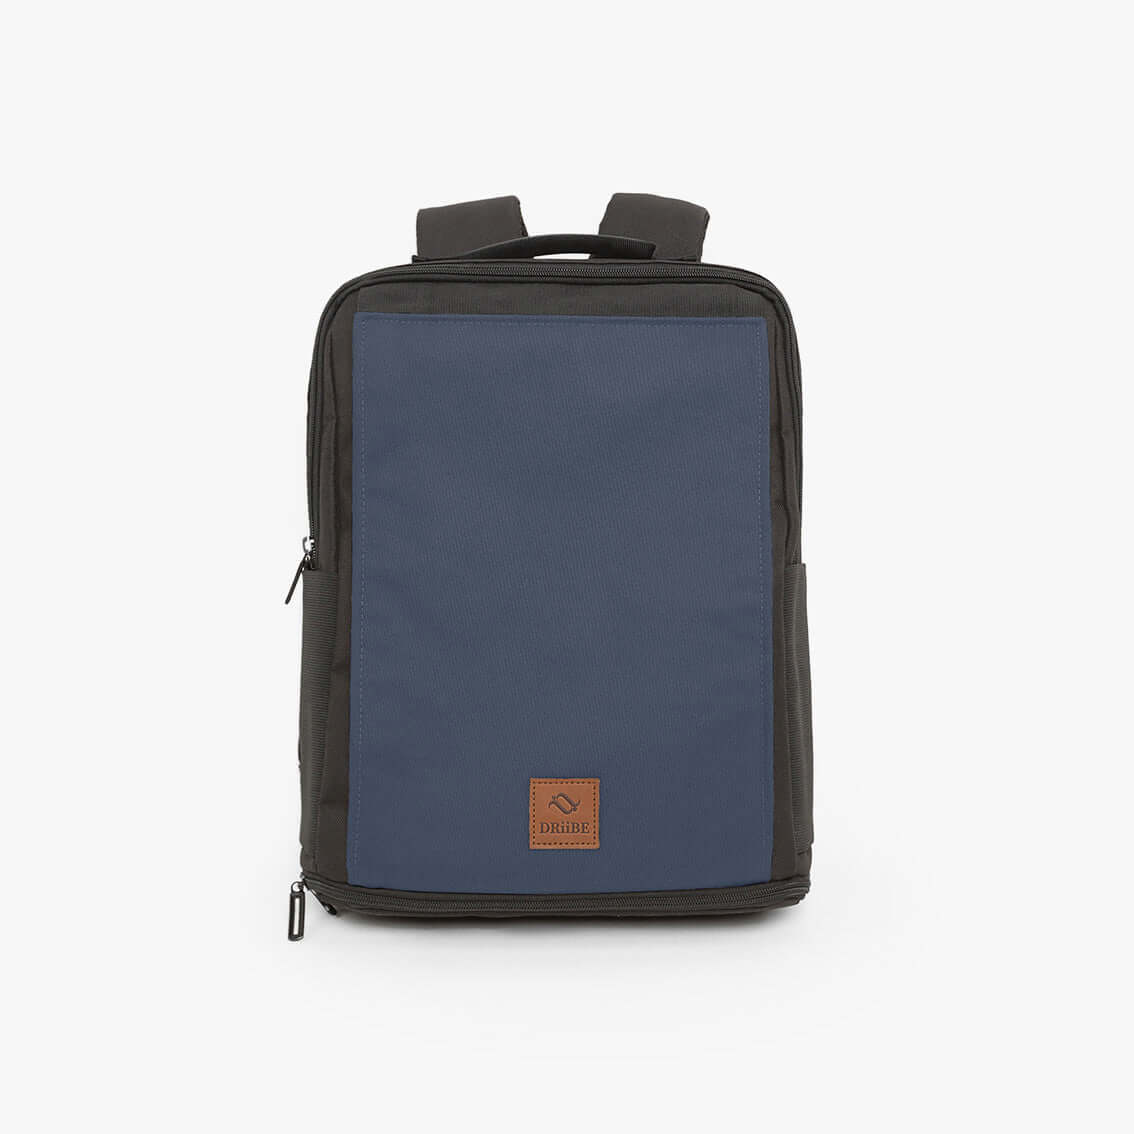 CITYC Laptop 2 in 1 Backpack Navy Blue-0